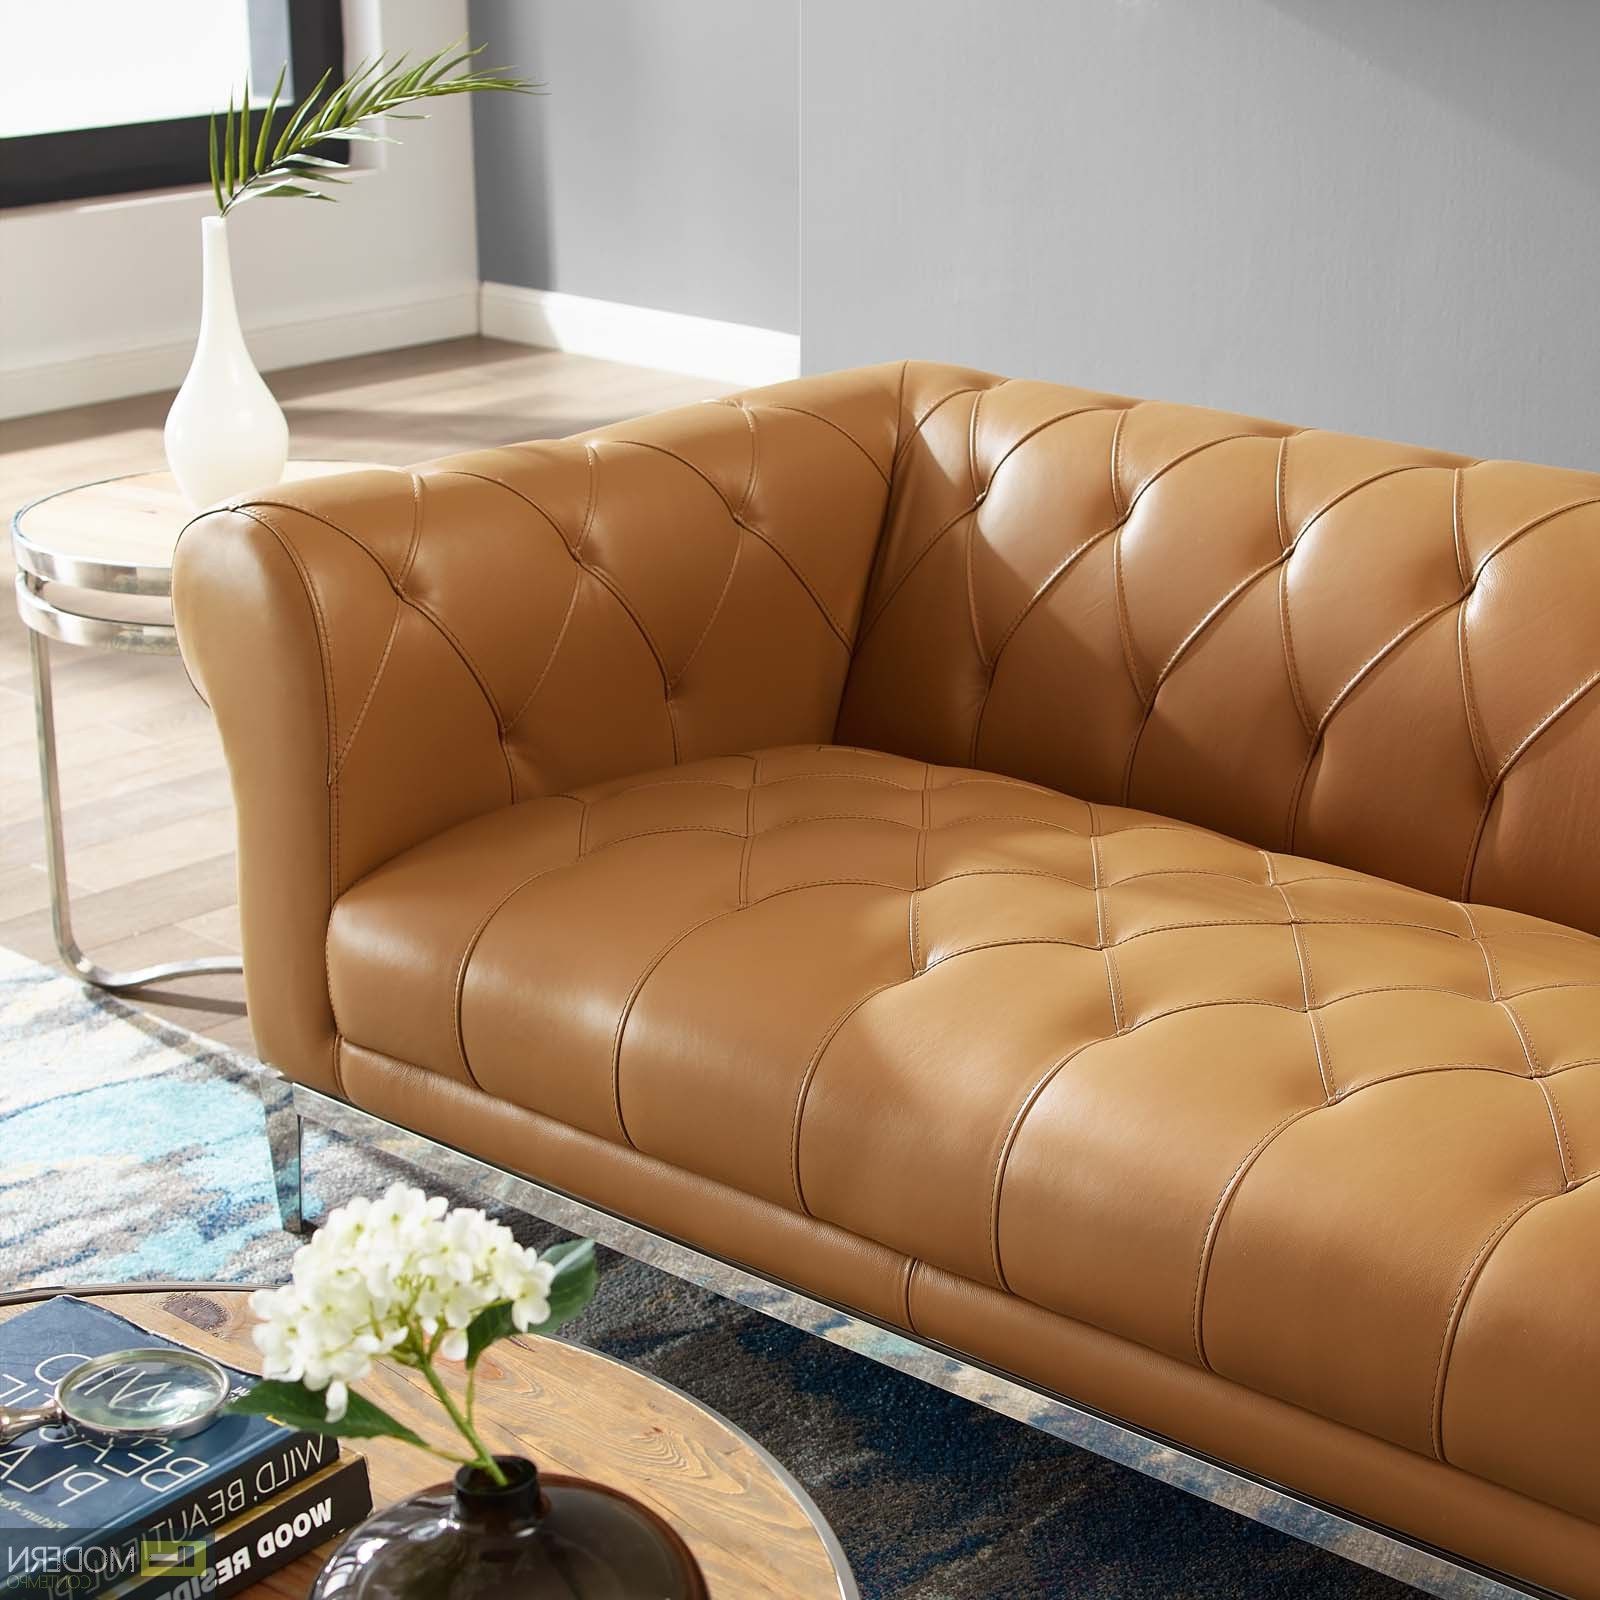 Trendy Tufted Upholstered Sofas Regarding Modern Contempo – Cyprus Tufted Button Upholstered Leather Chesterfield (View 3 of 15)